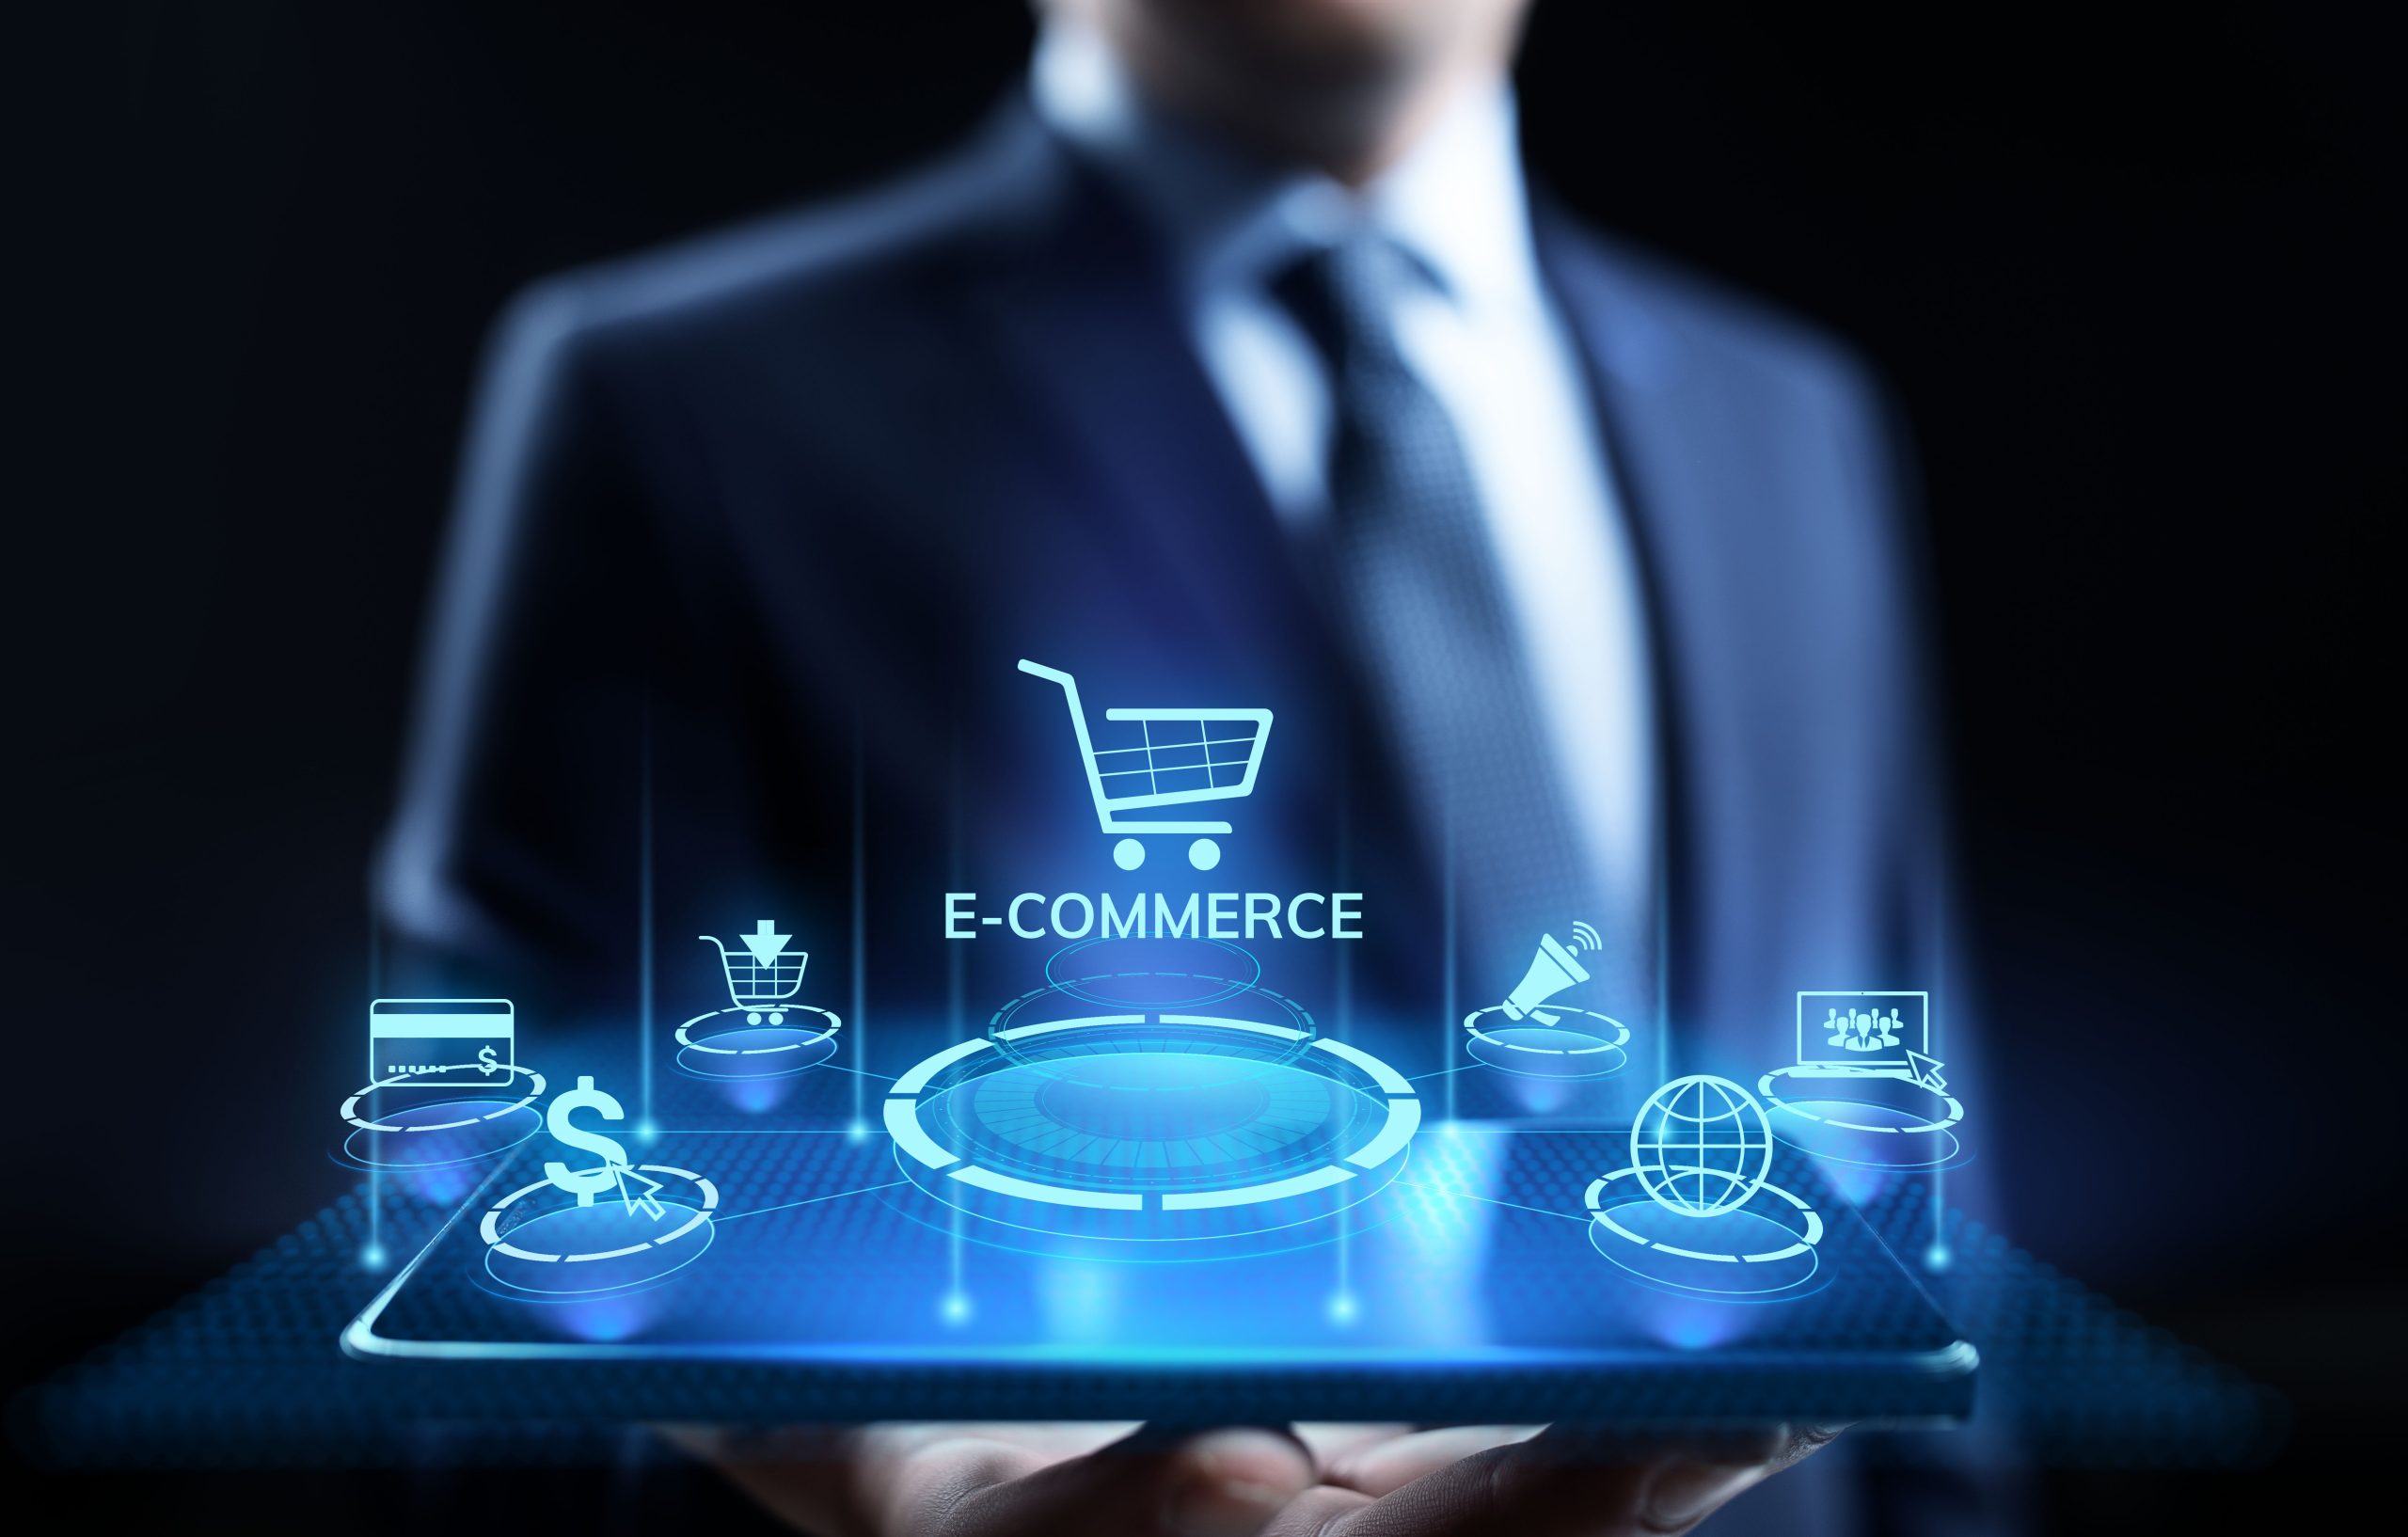 E-commerce Online Shopping Digital marketing and sales business technology concept